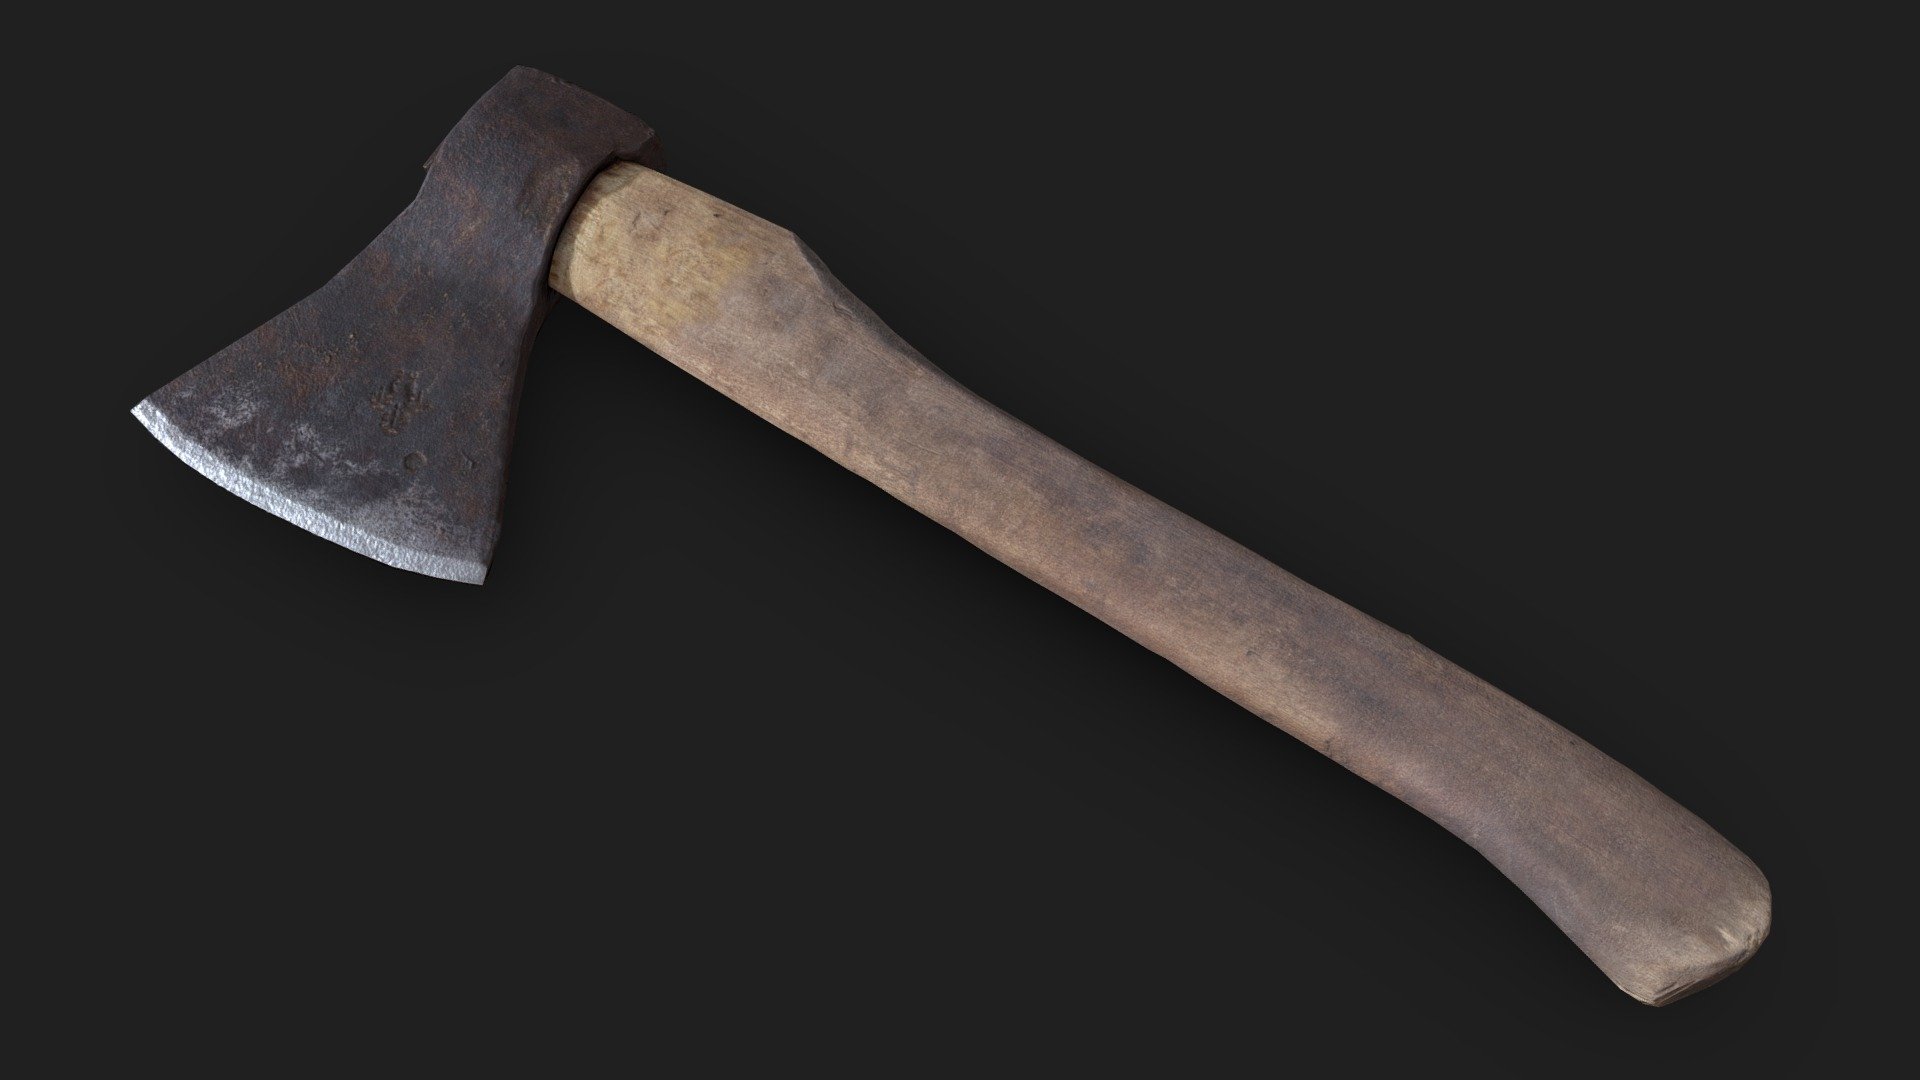 An axe with a wooden handle, which is well suited for creating rustic scenes and woodcutters.

Technical specifications:

Close-up scan model 

Optimized model

non-overlapping UV map

ready for animation

PBR textures 2K resolution: Normal, Roughness, Albedo, Metal, Ambient Occlusion maps

Download package includes FBX, which are applicable for 3ds Max, Maya, Unreal Engine, Unity, Blender.

Enjoy! - Axe Scan - Buy Royalty Free 3D model by U3DA (@unreal.artists) 3d model